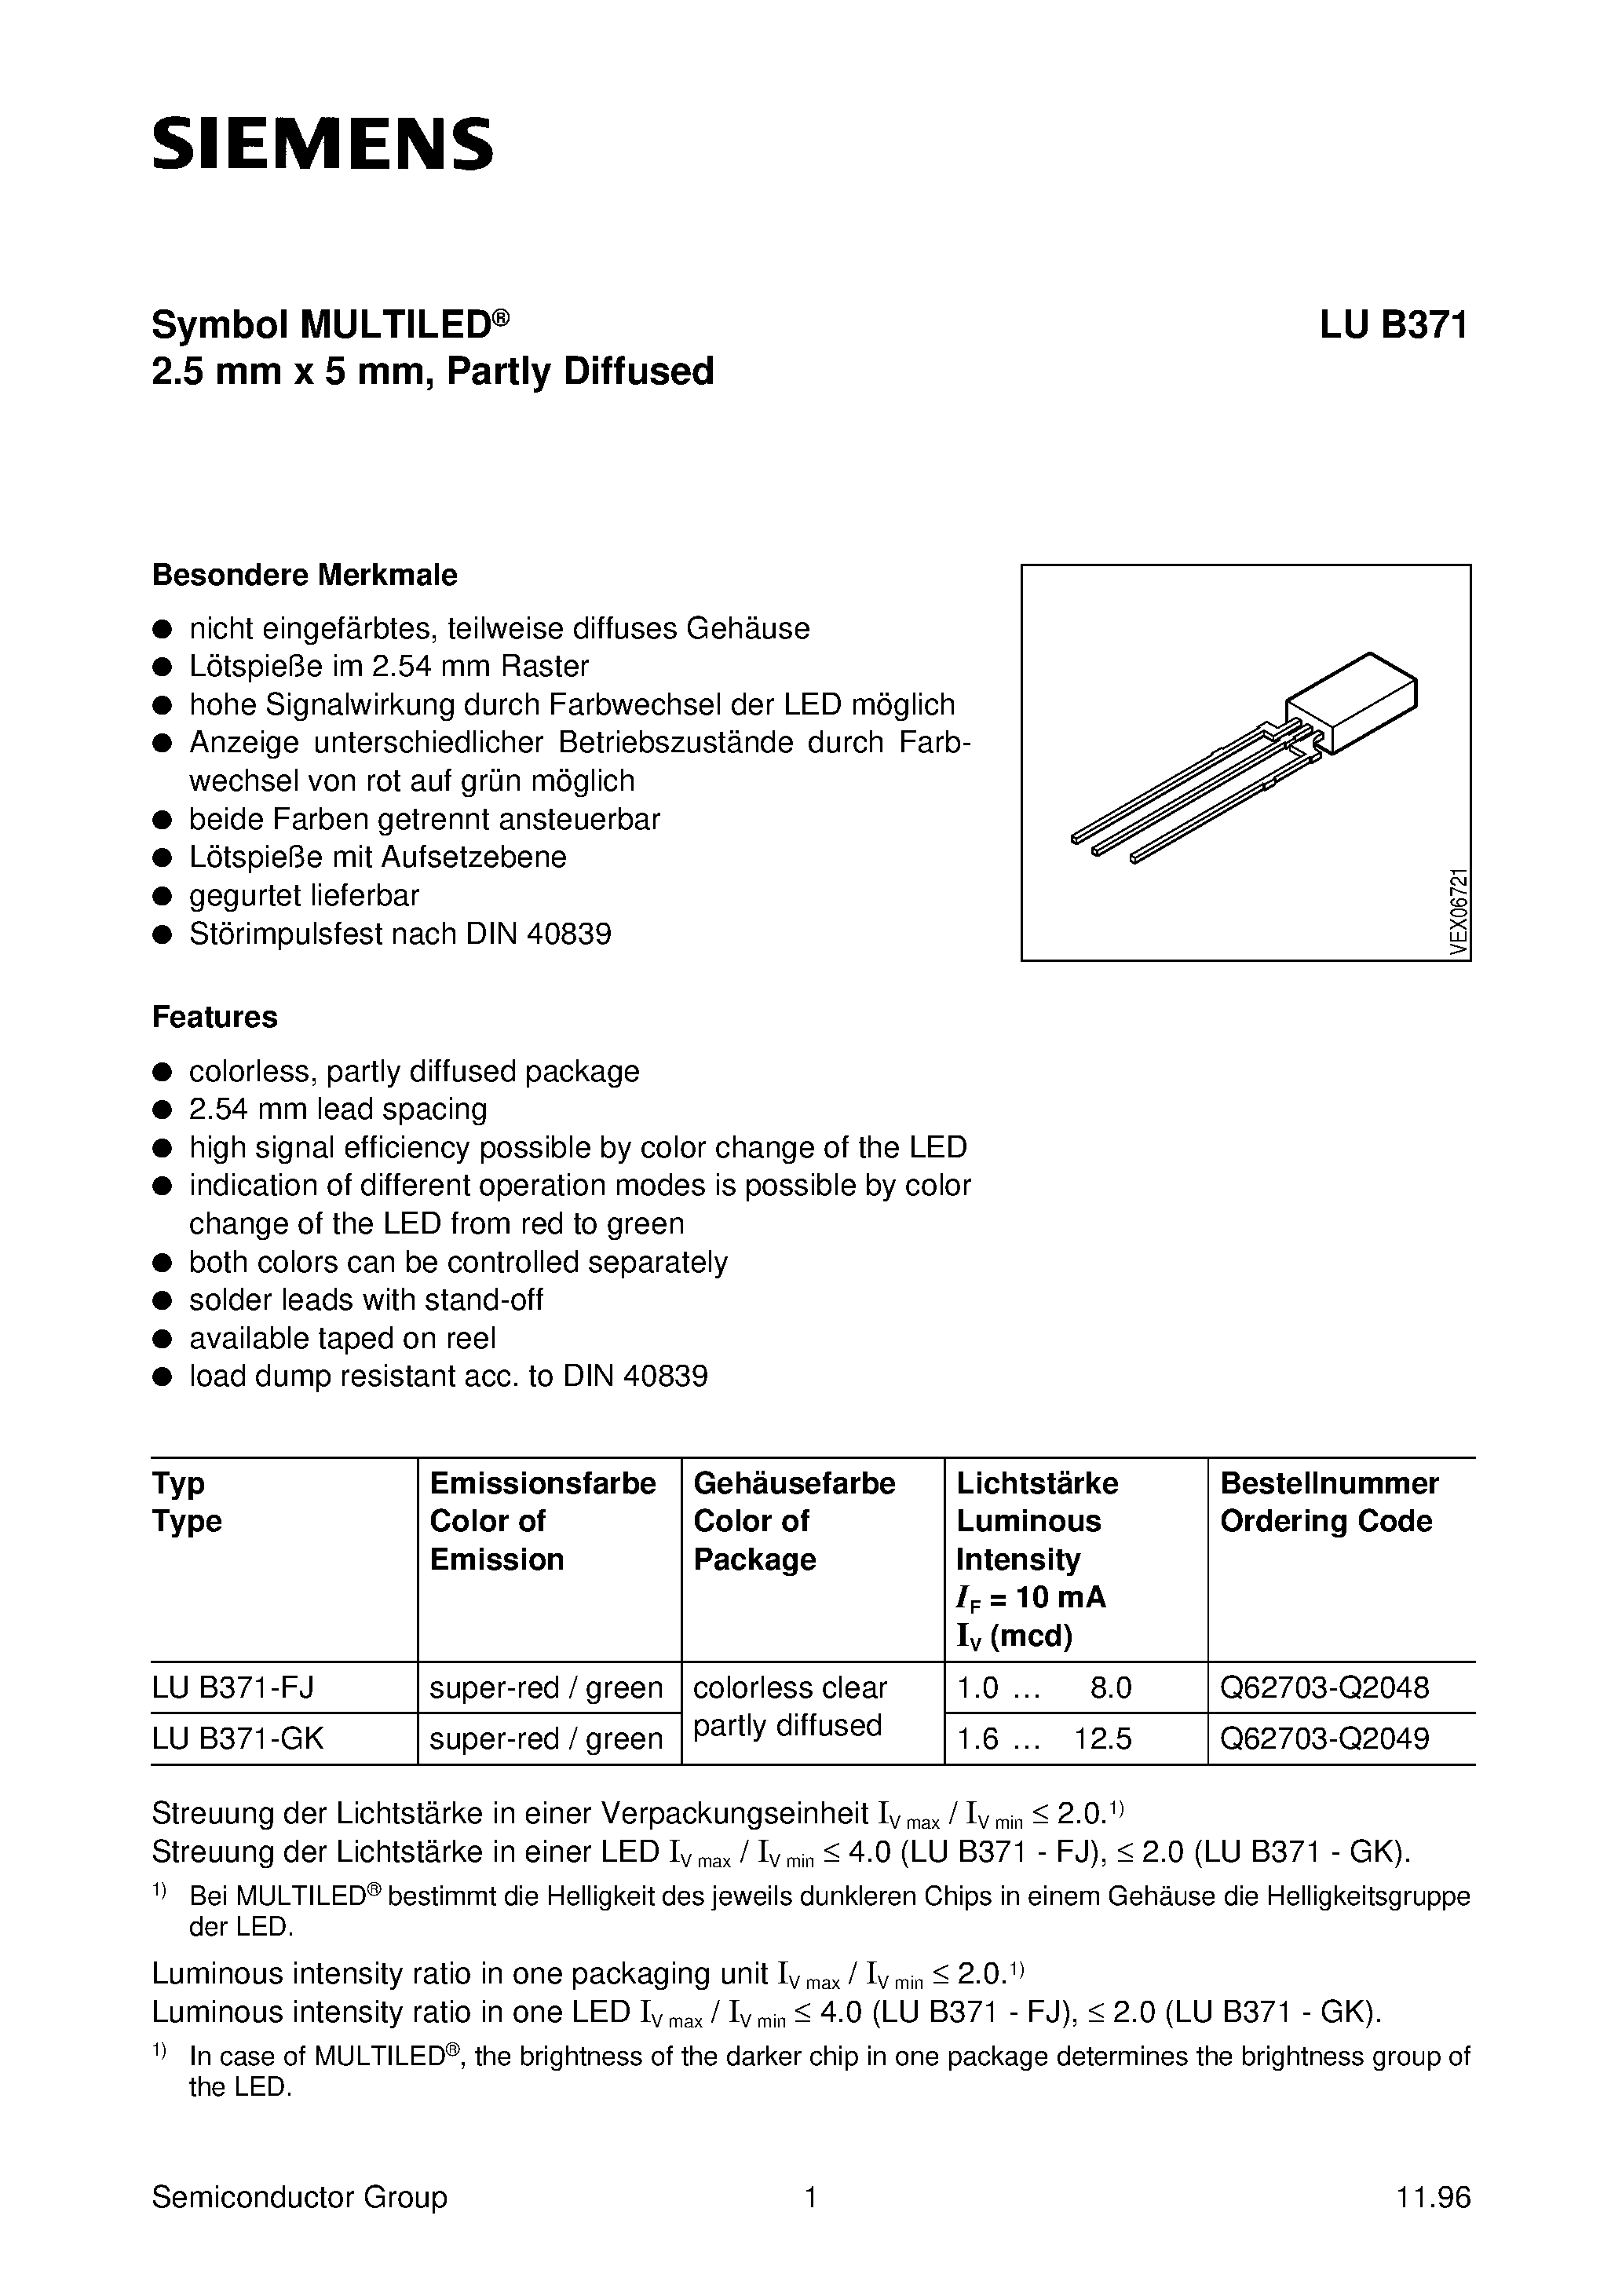 Datasheet LUB371 - Symbol MULTILED 2.5 mm x 5 mm/ Partly Diffused page 1